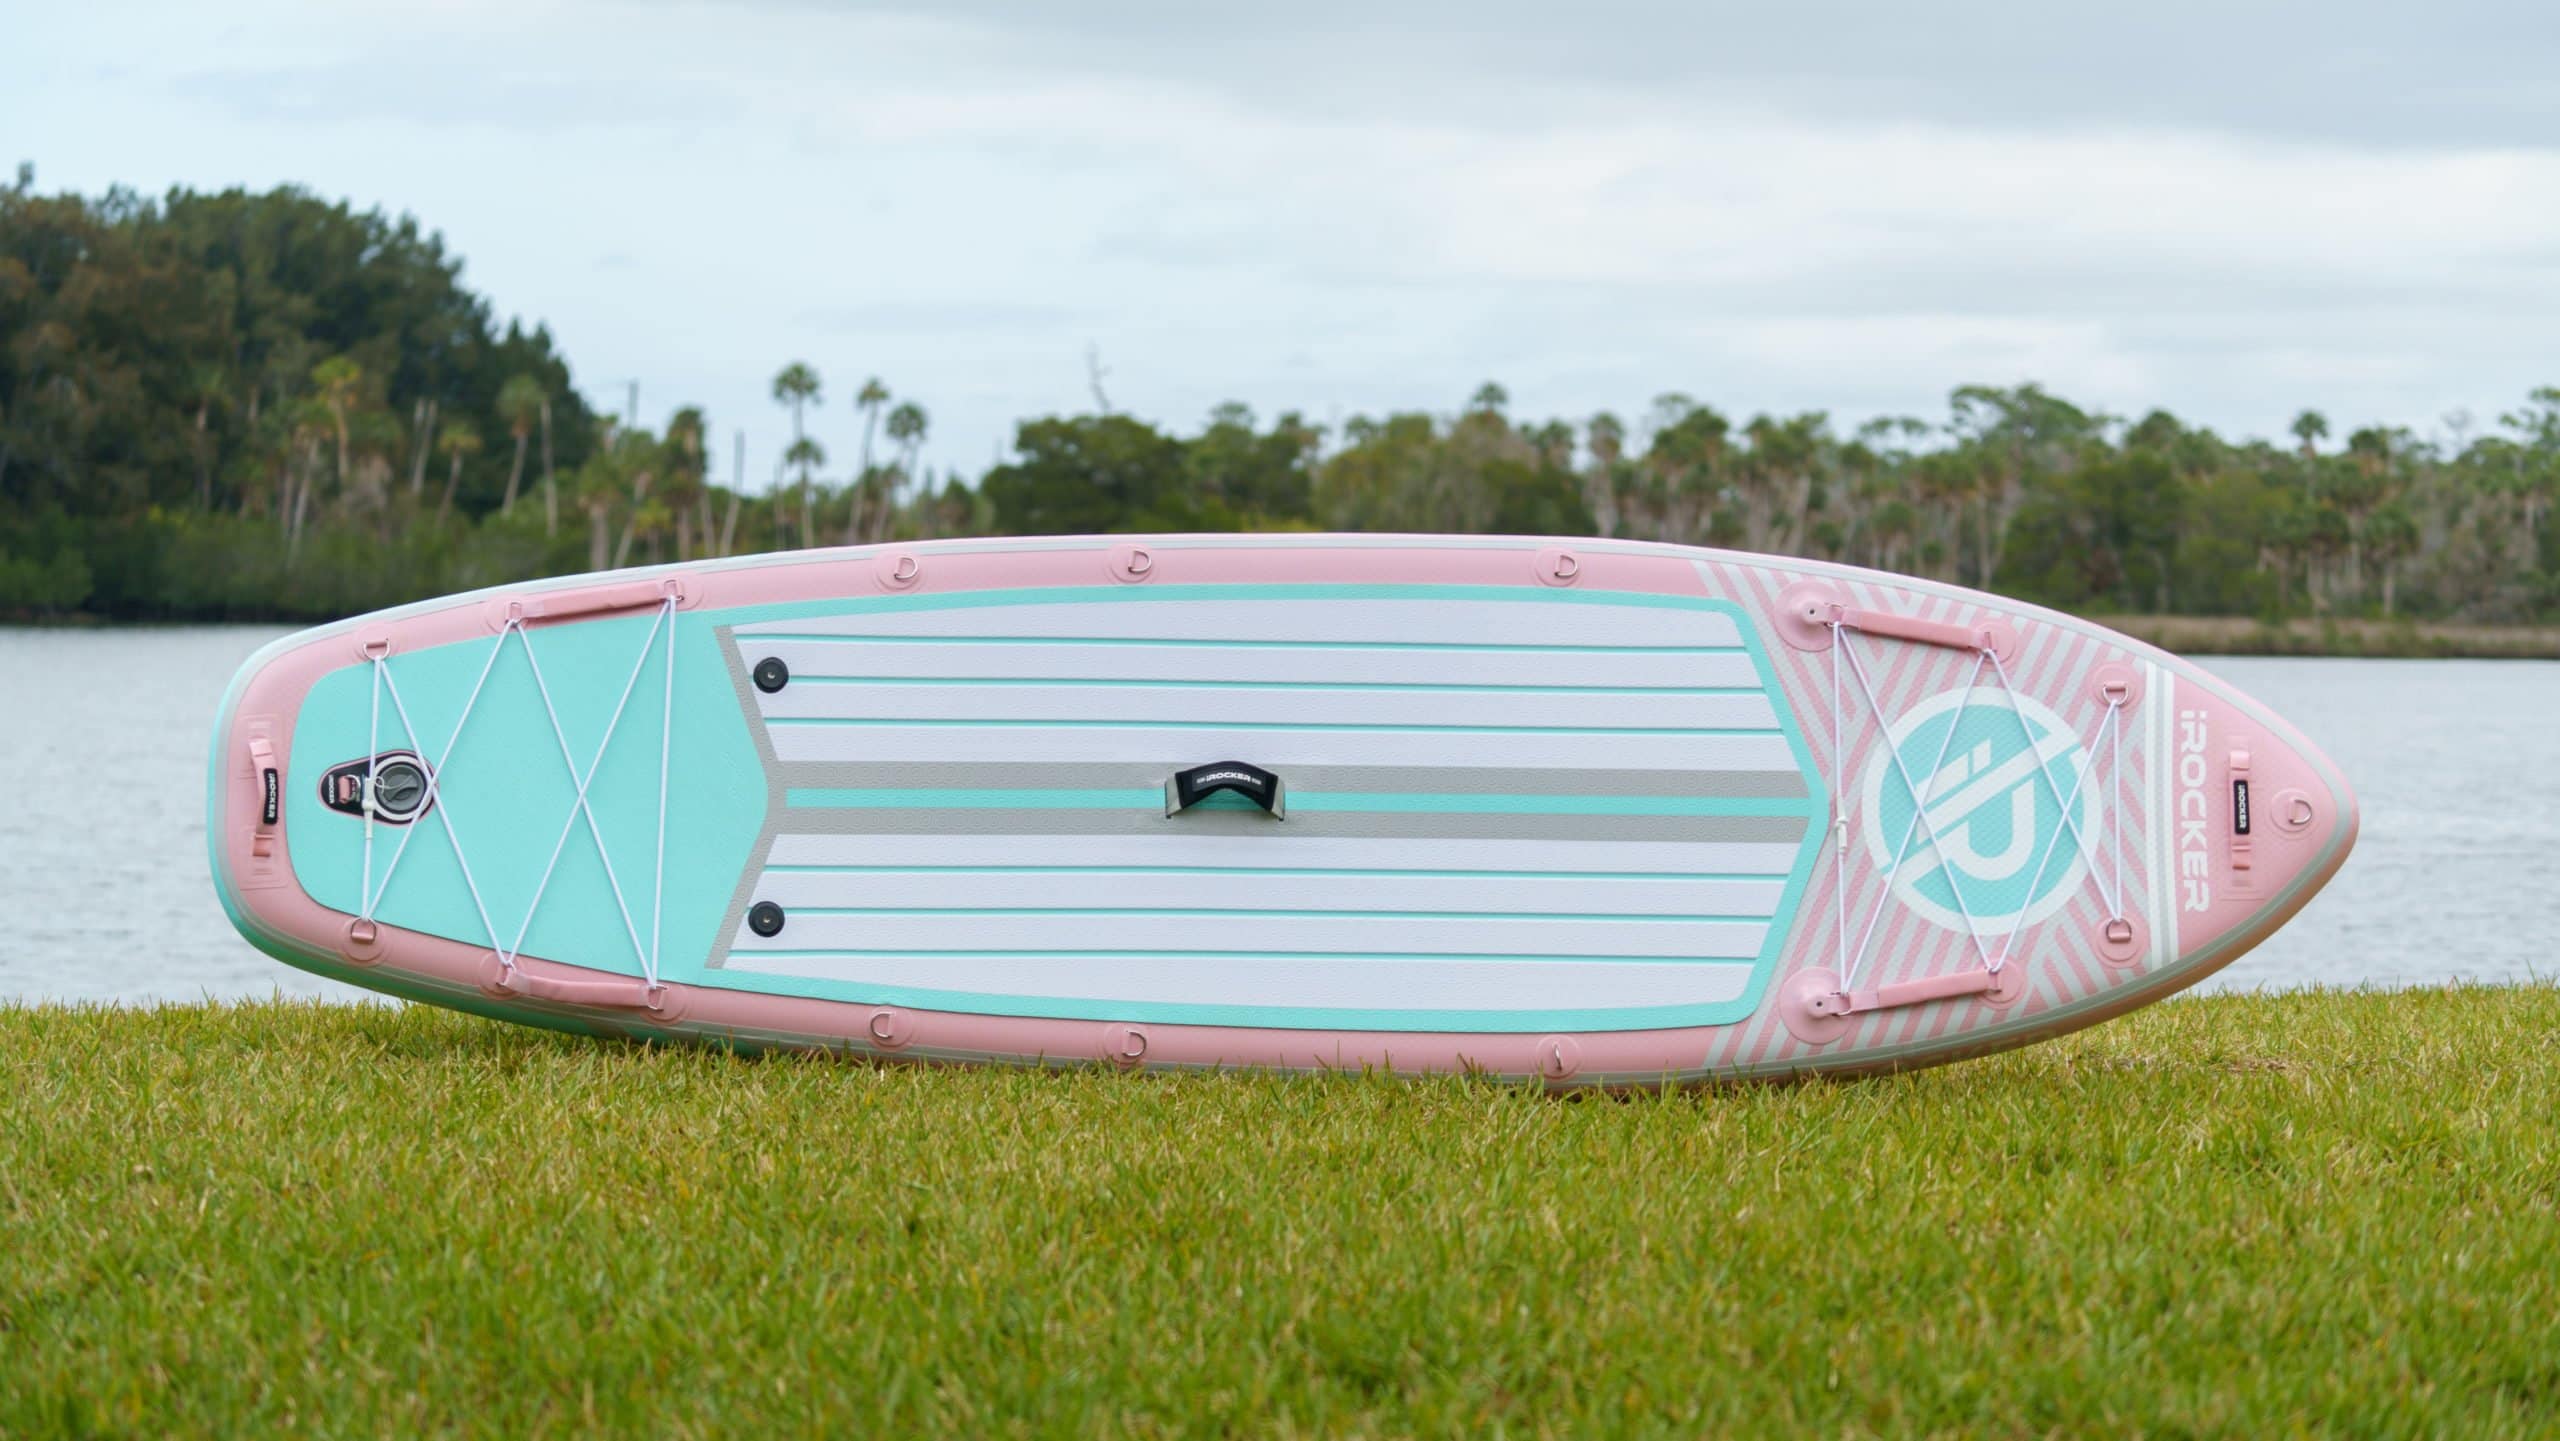 Overview of the 2021 iROCKER paddle board in pink.